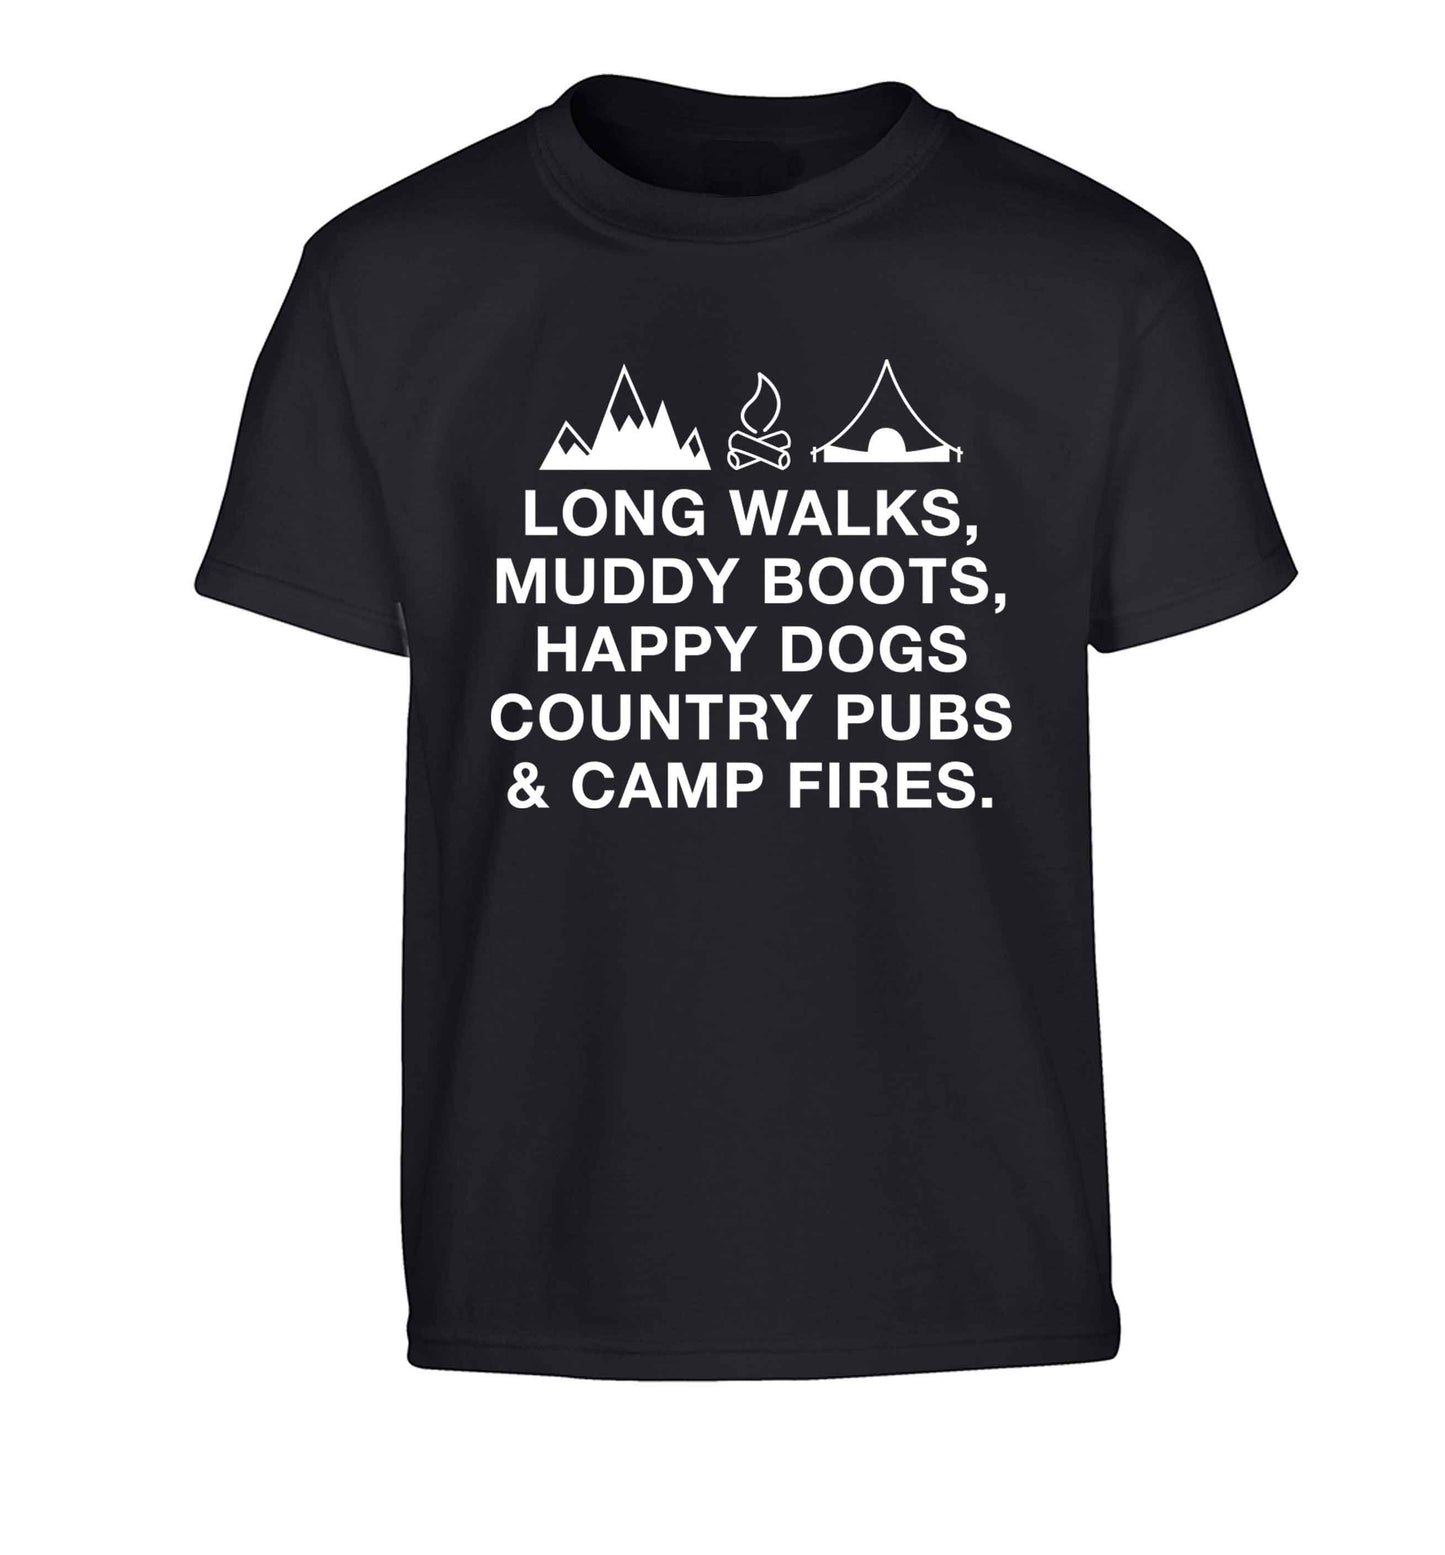 Long walks muddy boots happy dogs country pubs and camp fires Children's black Tshirt 12-13 Years